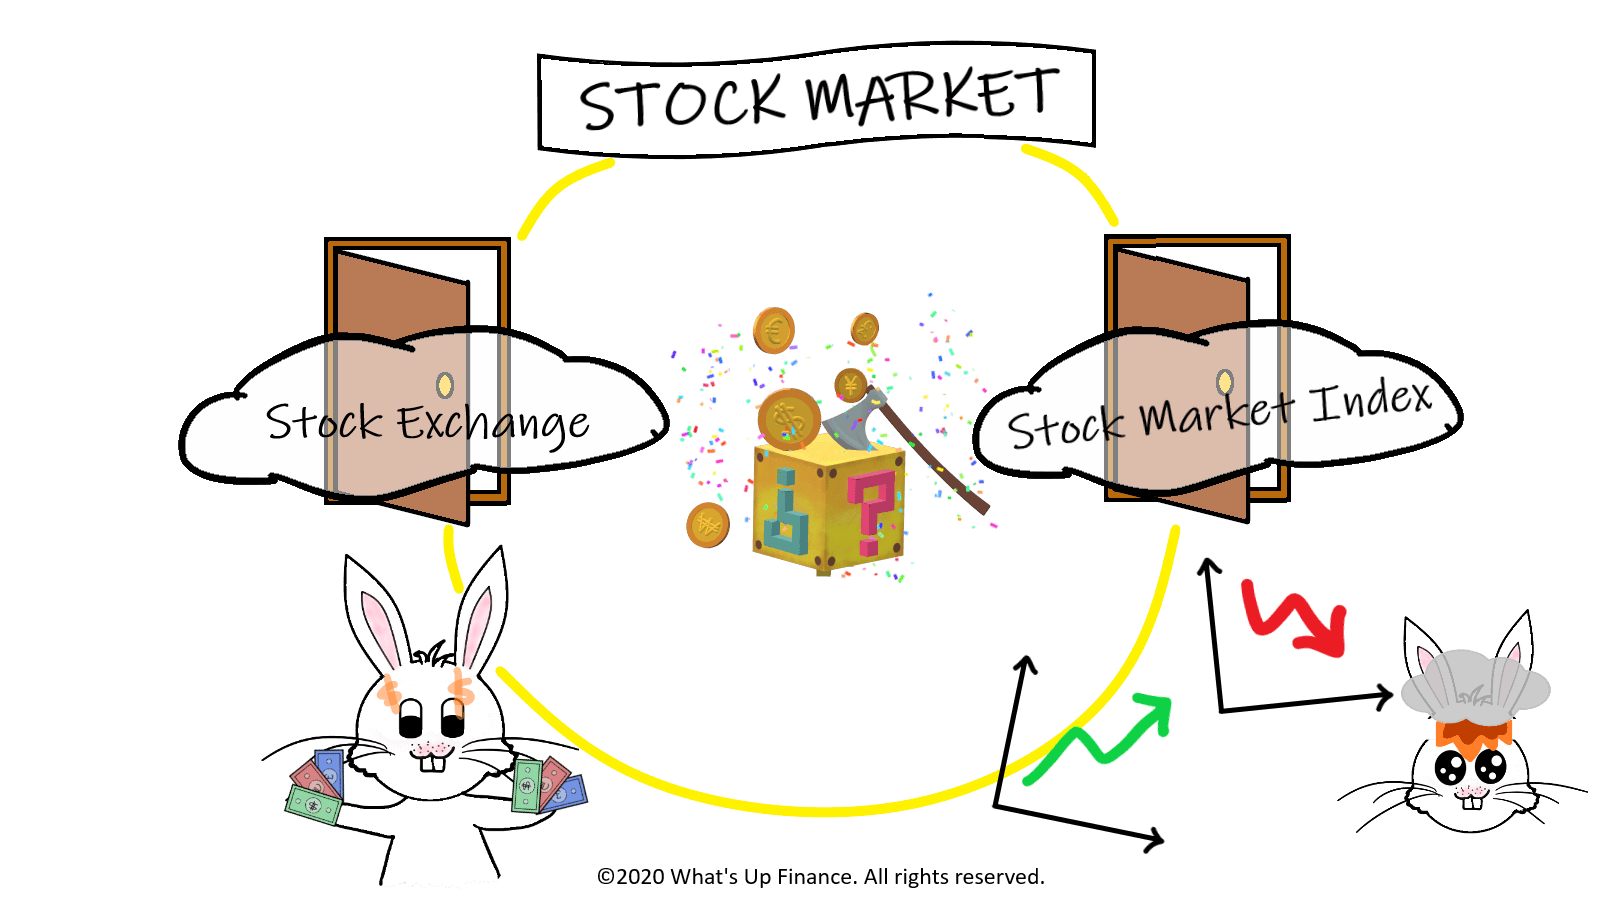 Stock Market: Stock Exchanges and Stock Indices